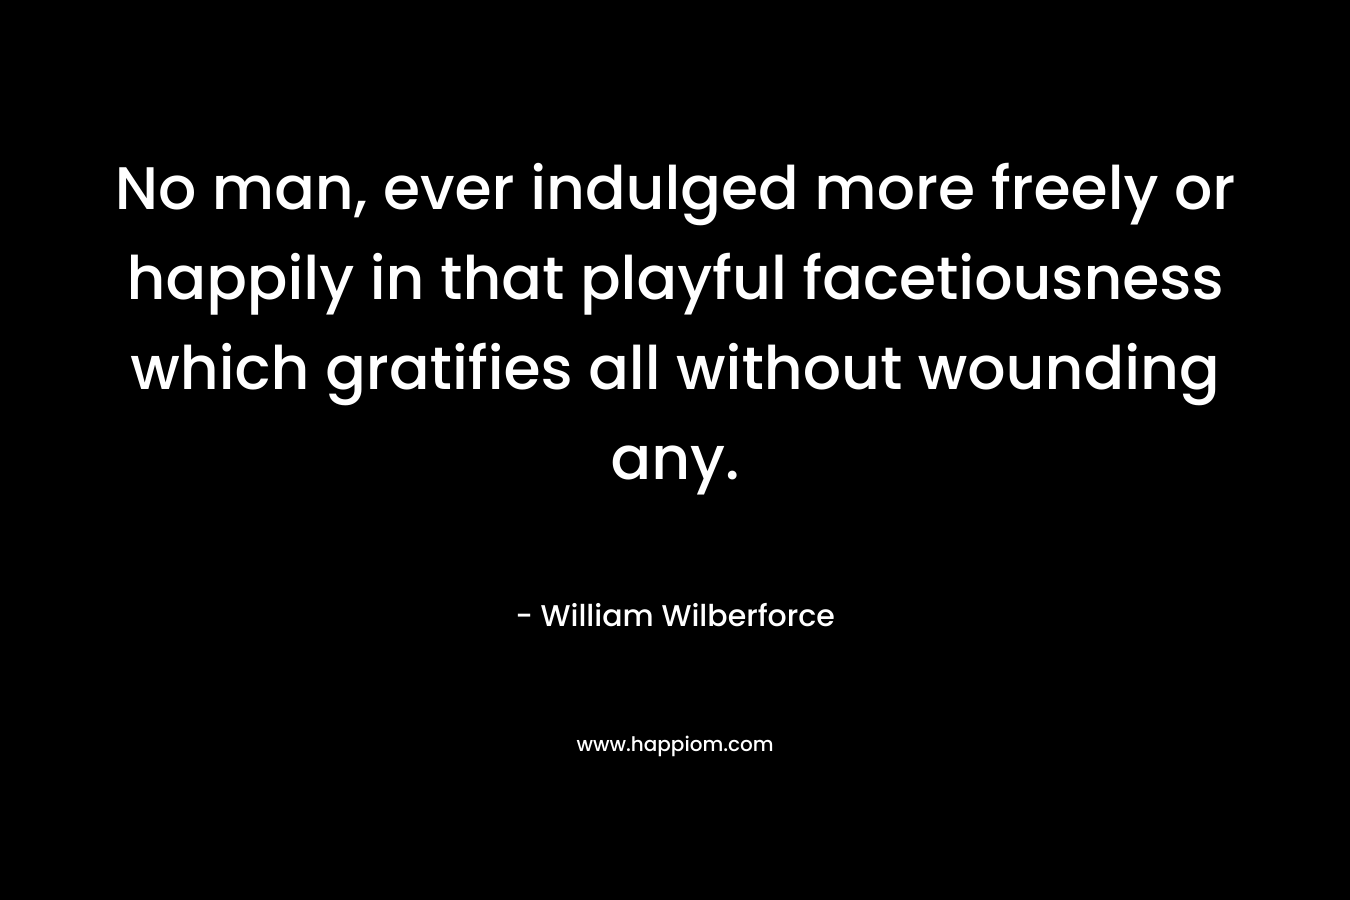 No man, ever indulged more freely or happily in that playful facetiousness which gratifies all without wounding any.